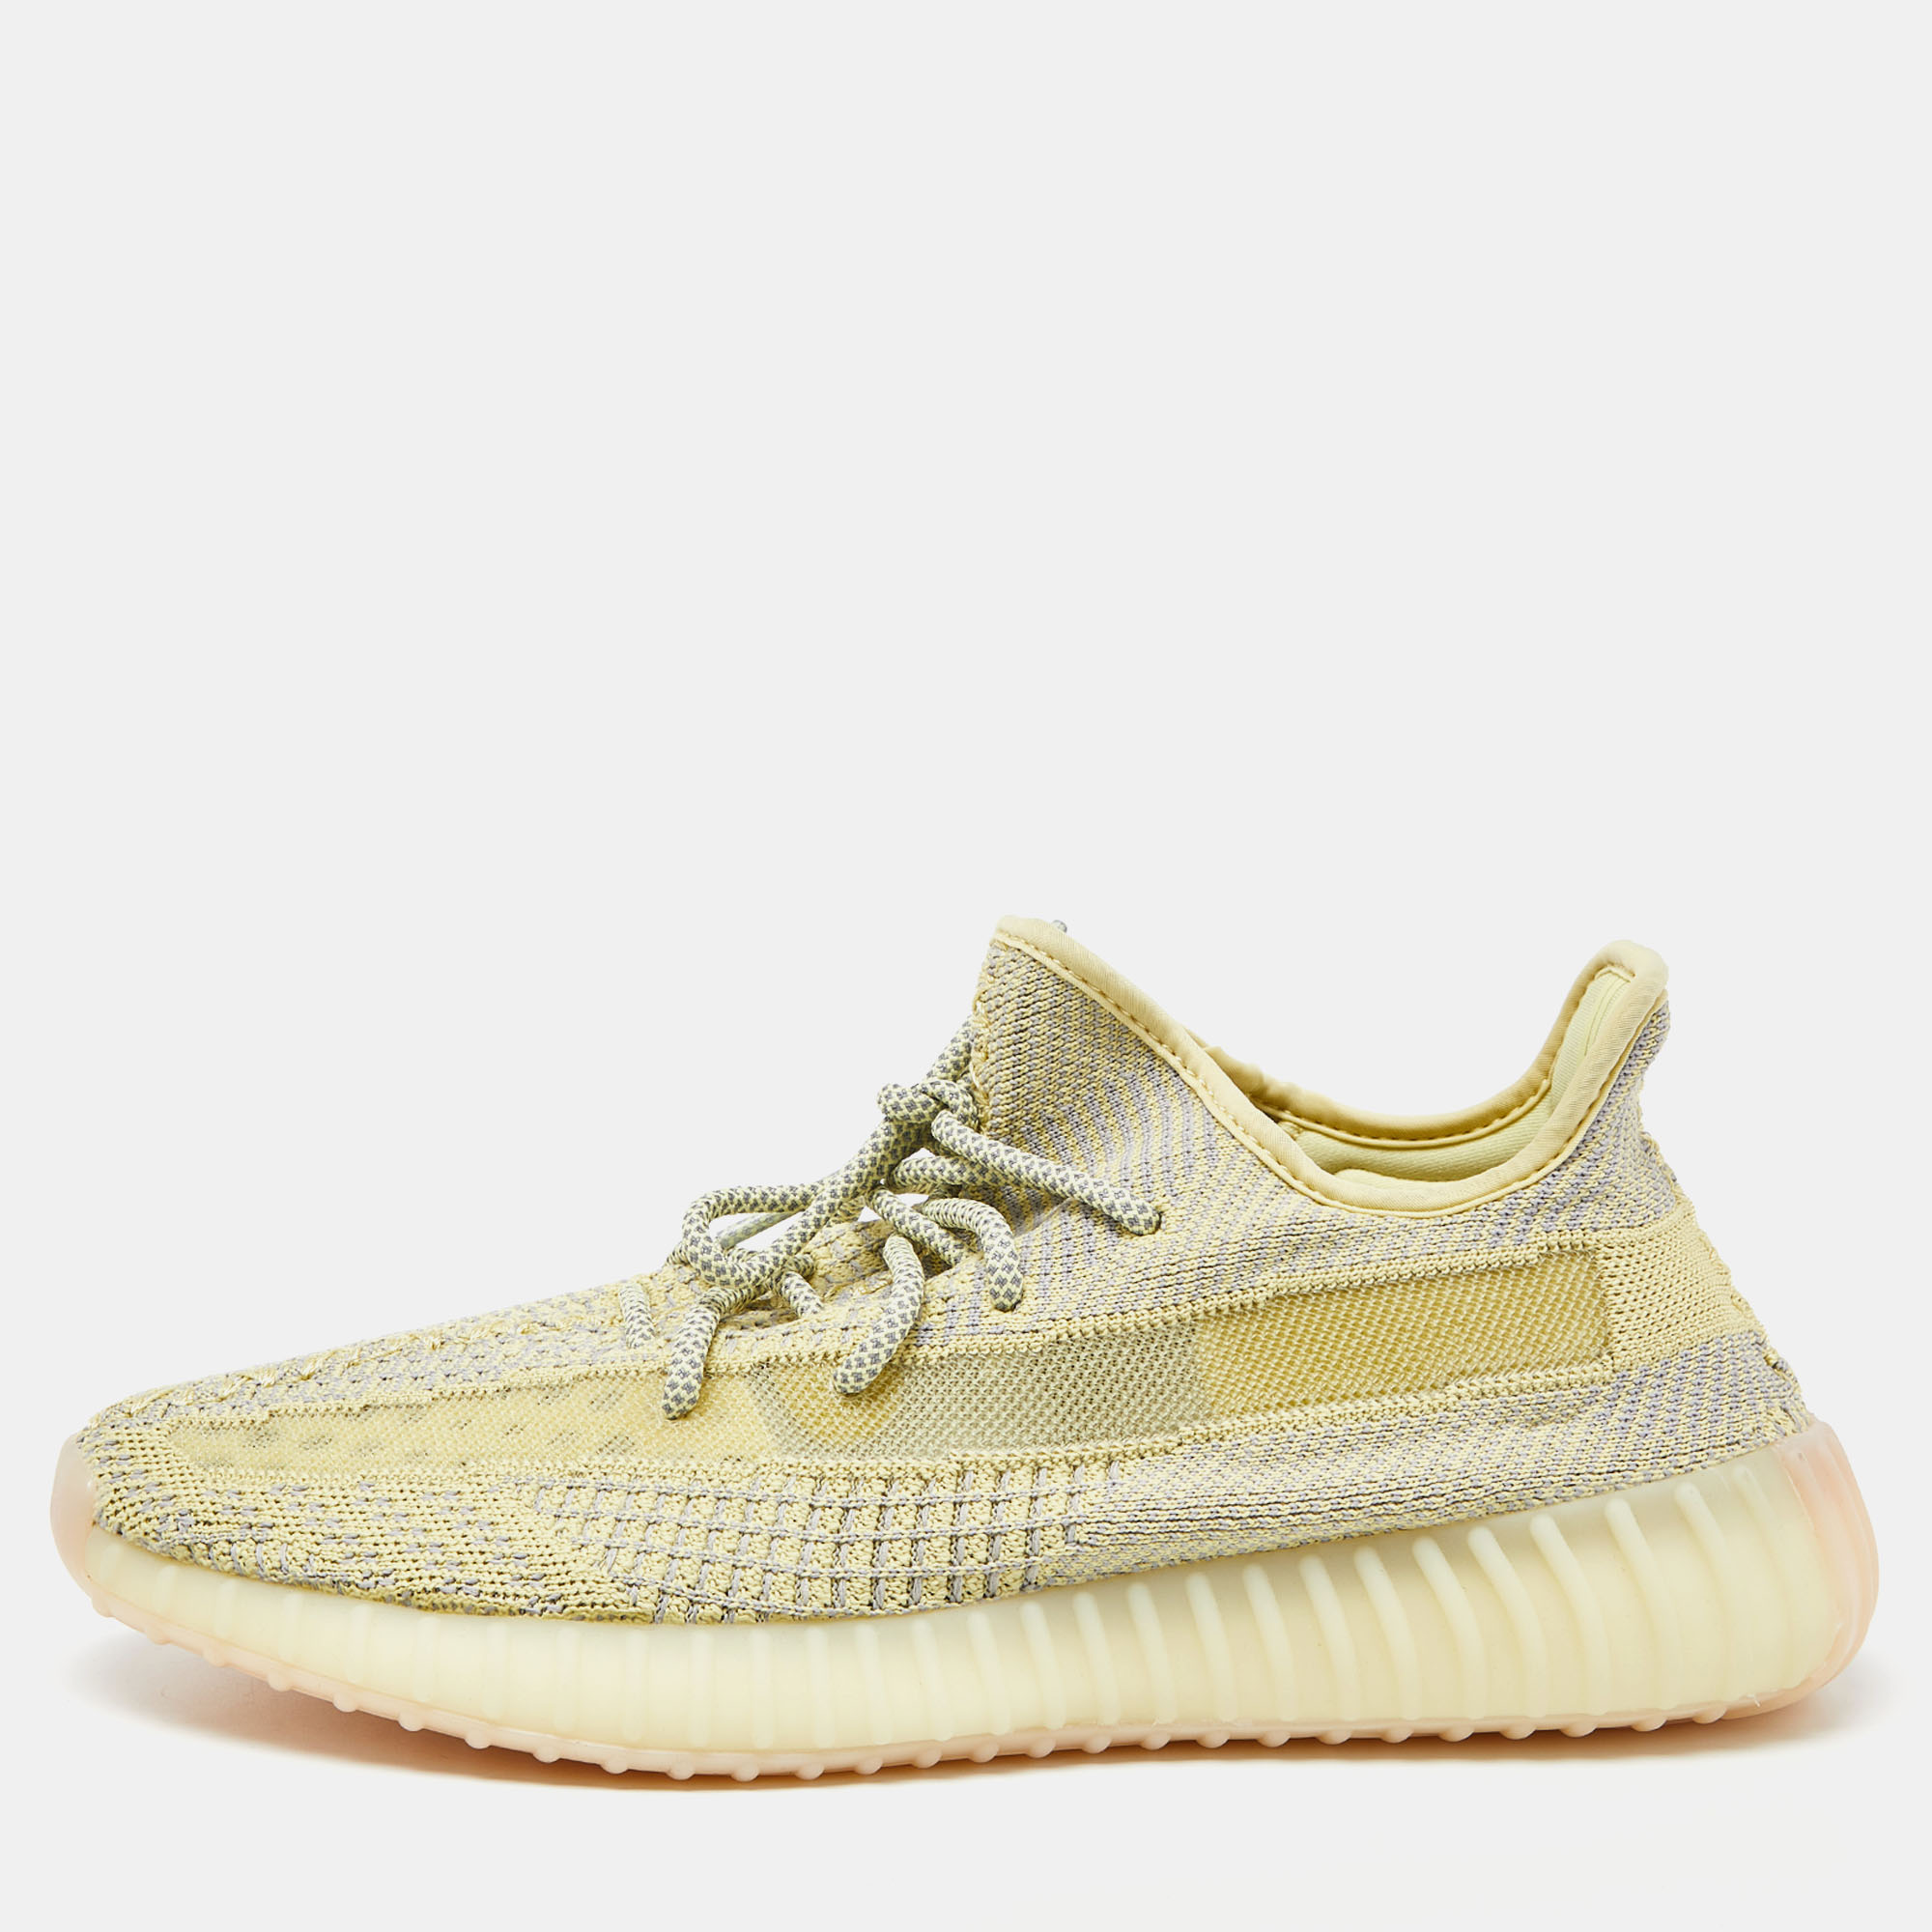 Yeezy X Adidas Yellow/Grey Knit Fabric Boost 350 V2 Antlia Non-Reflective Sneakers Size 45 1/3